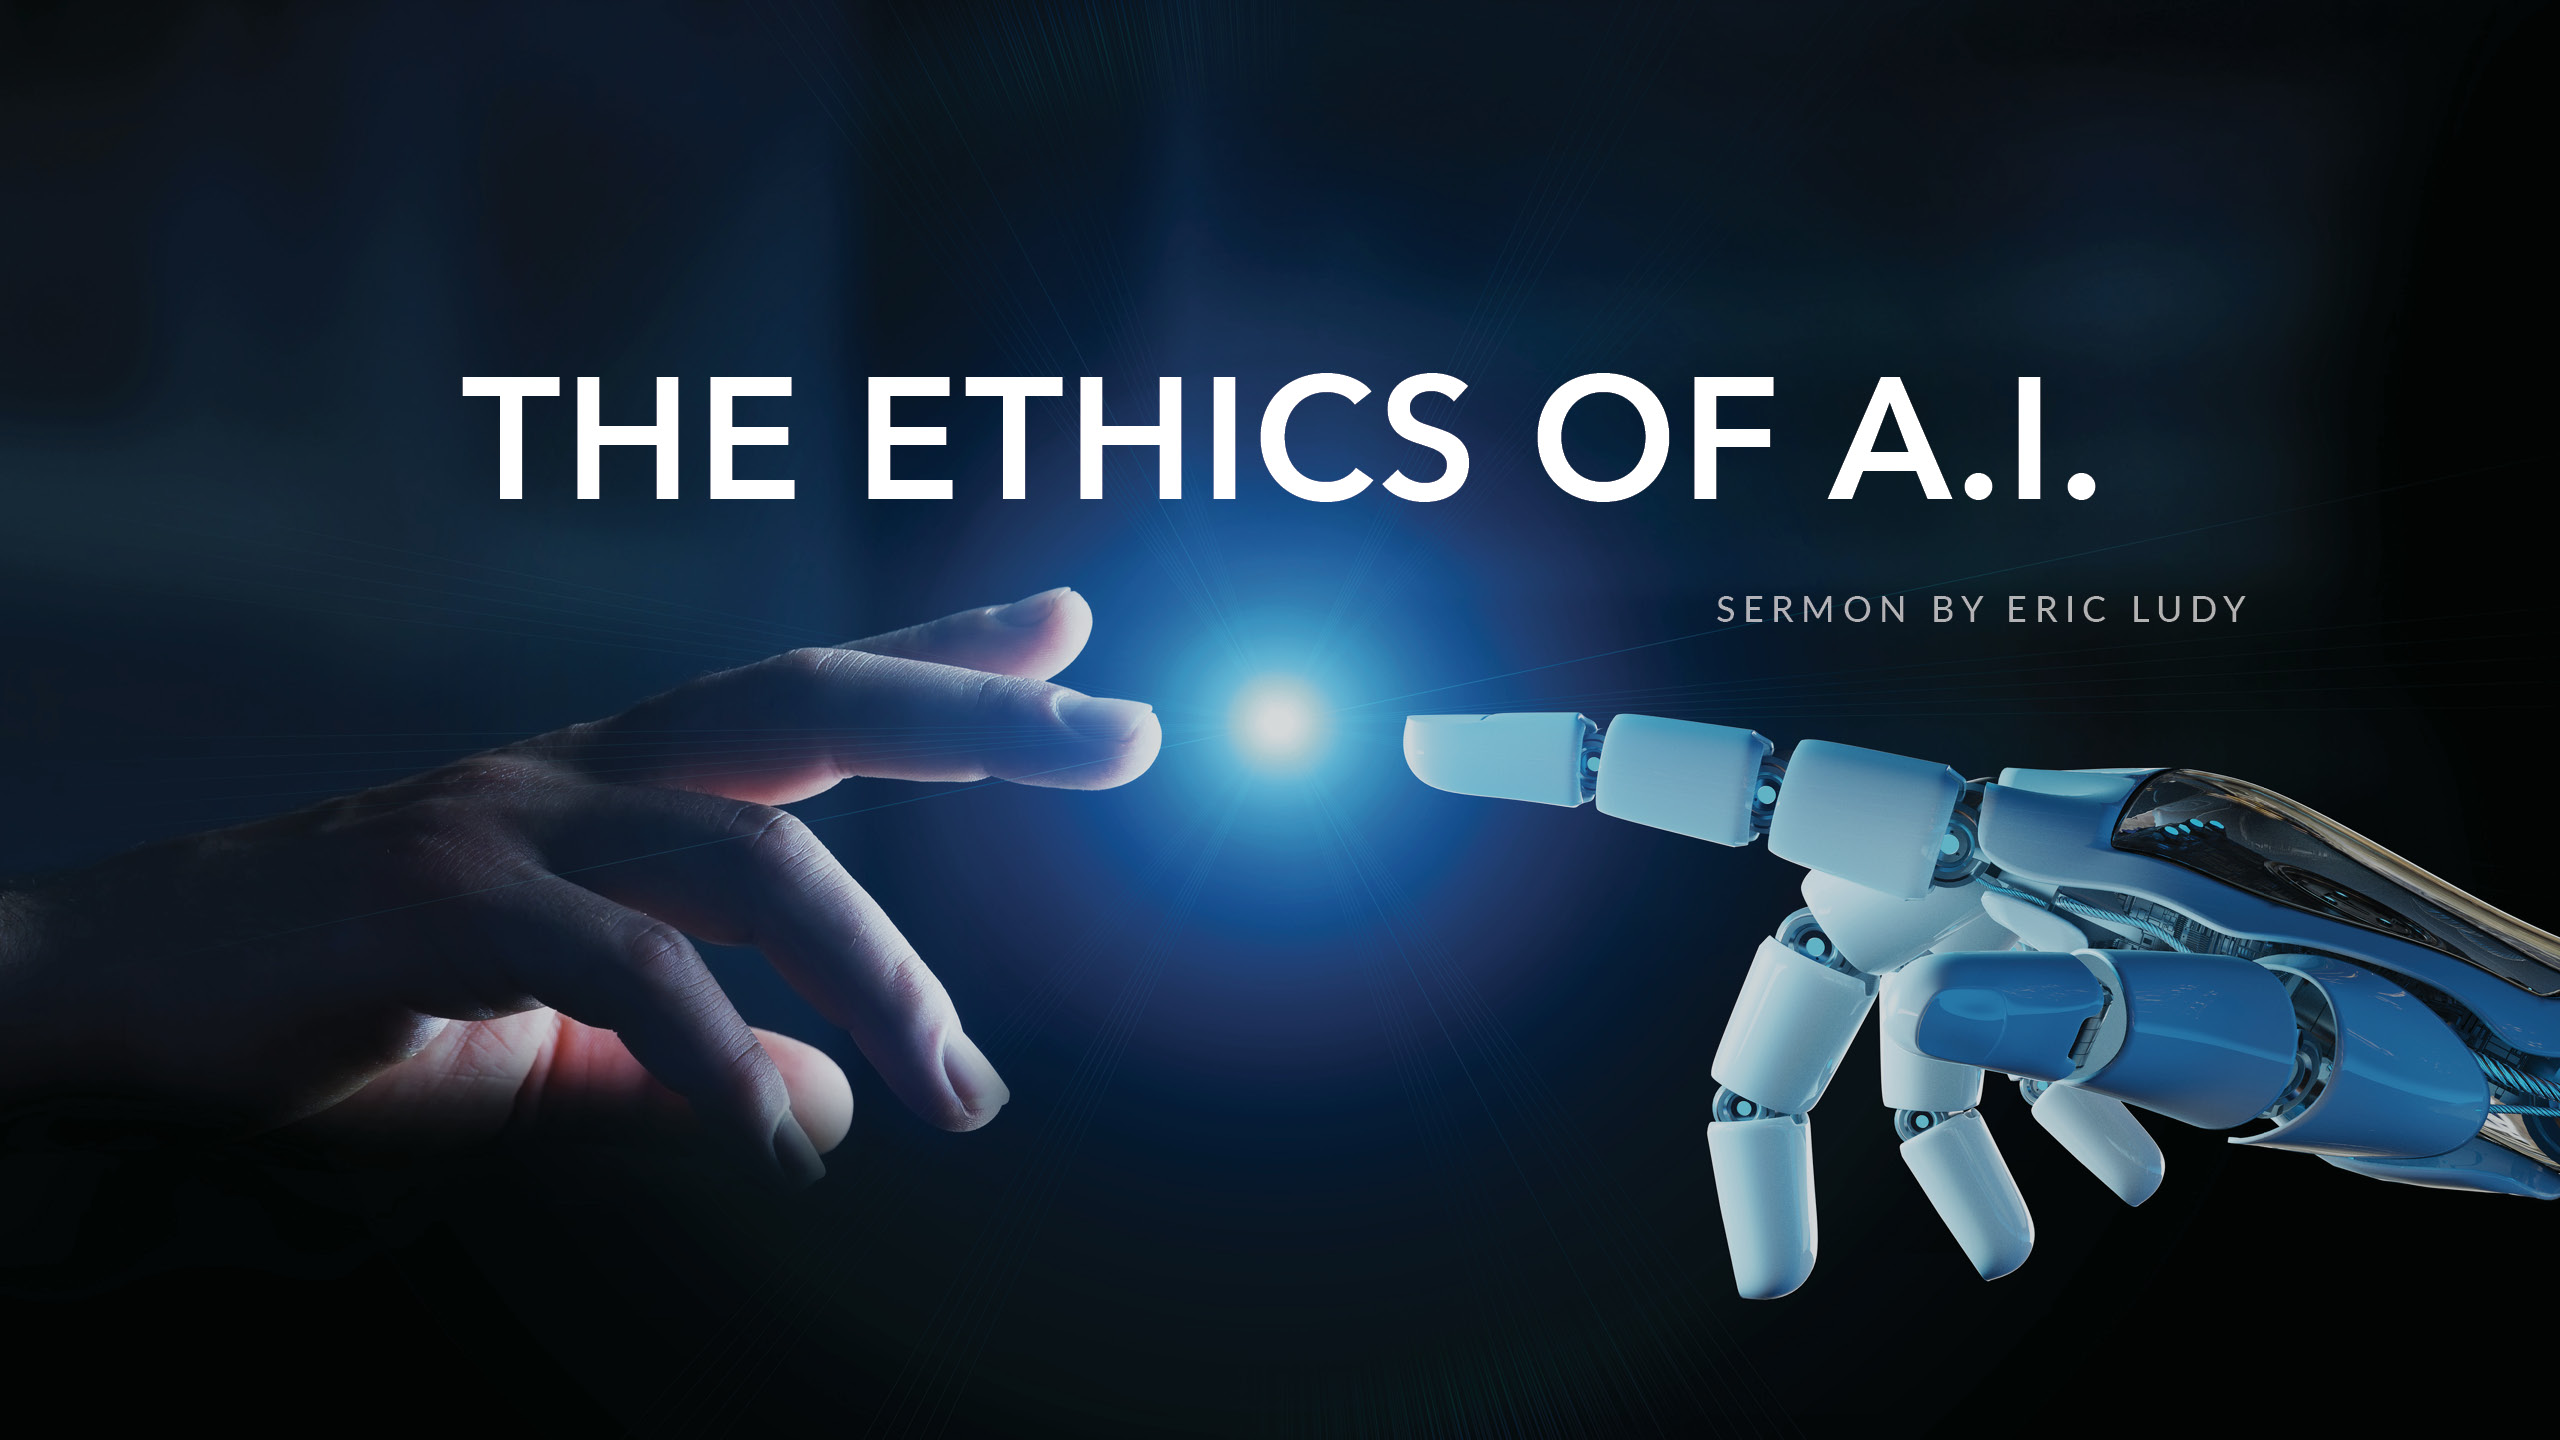 The Ethics of A.I.